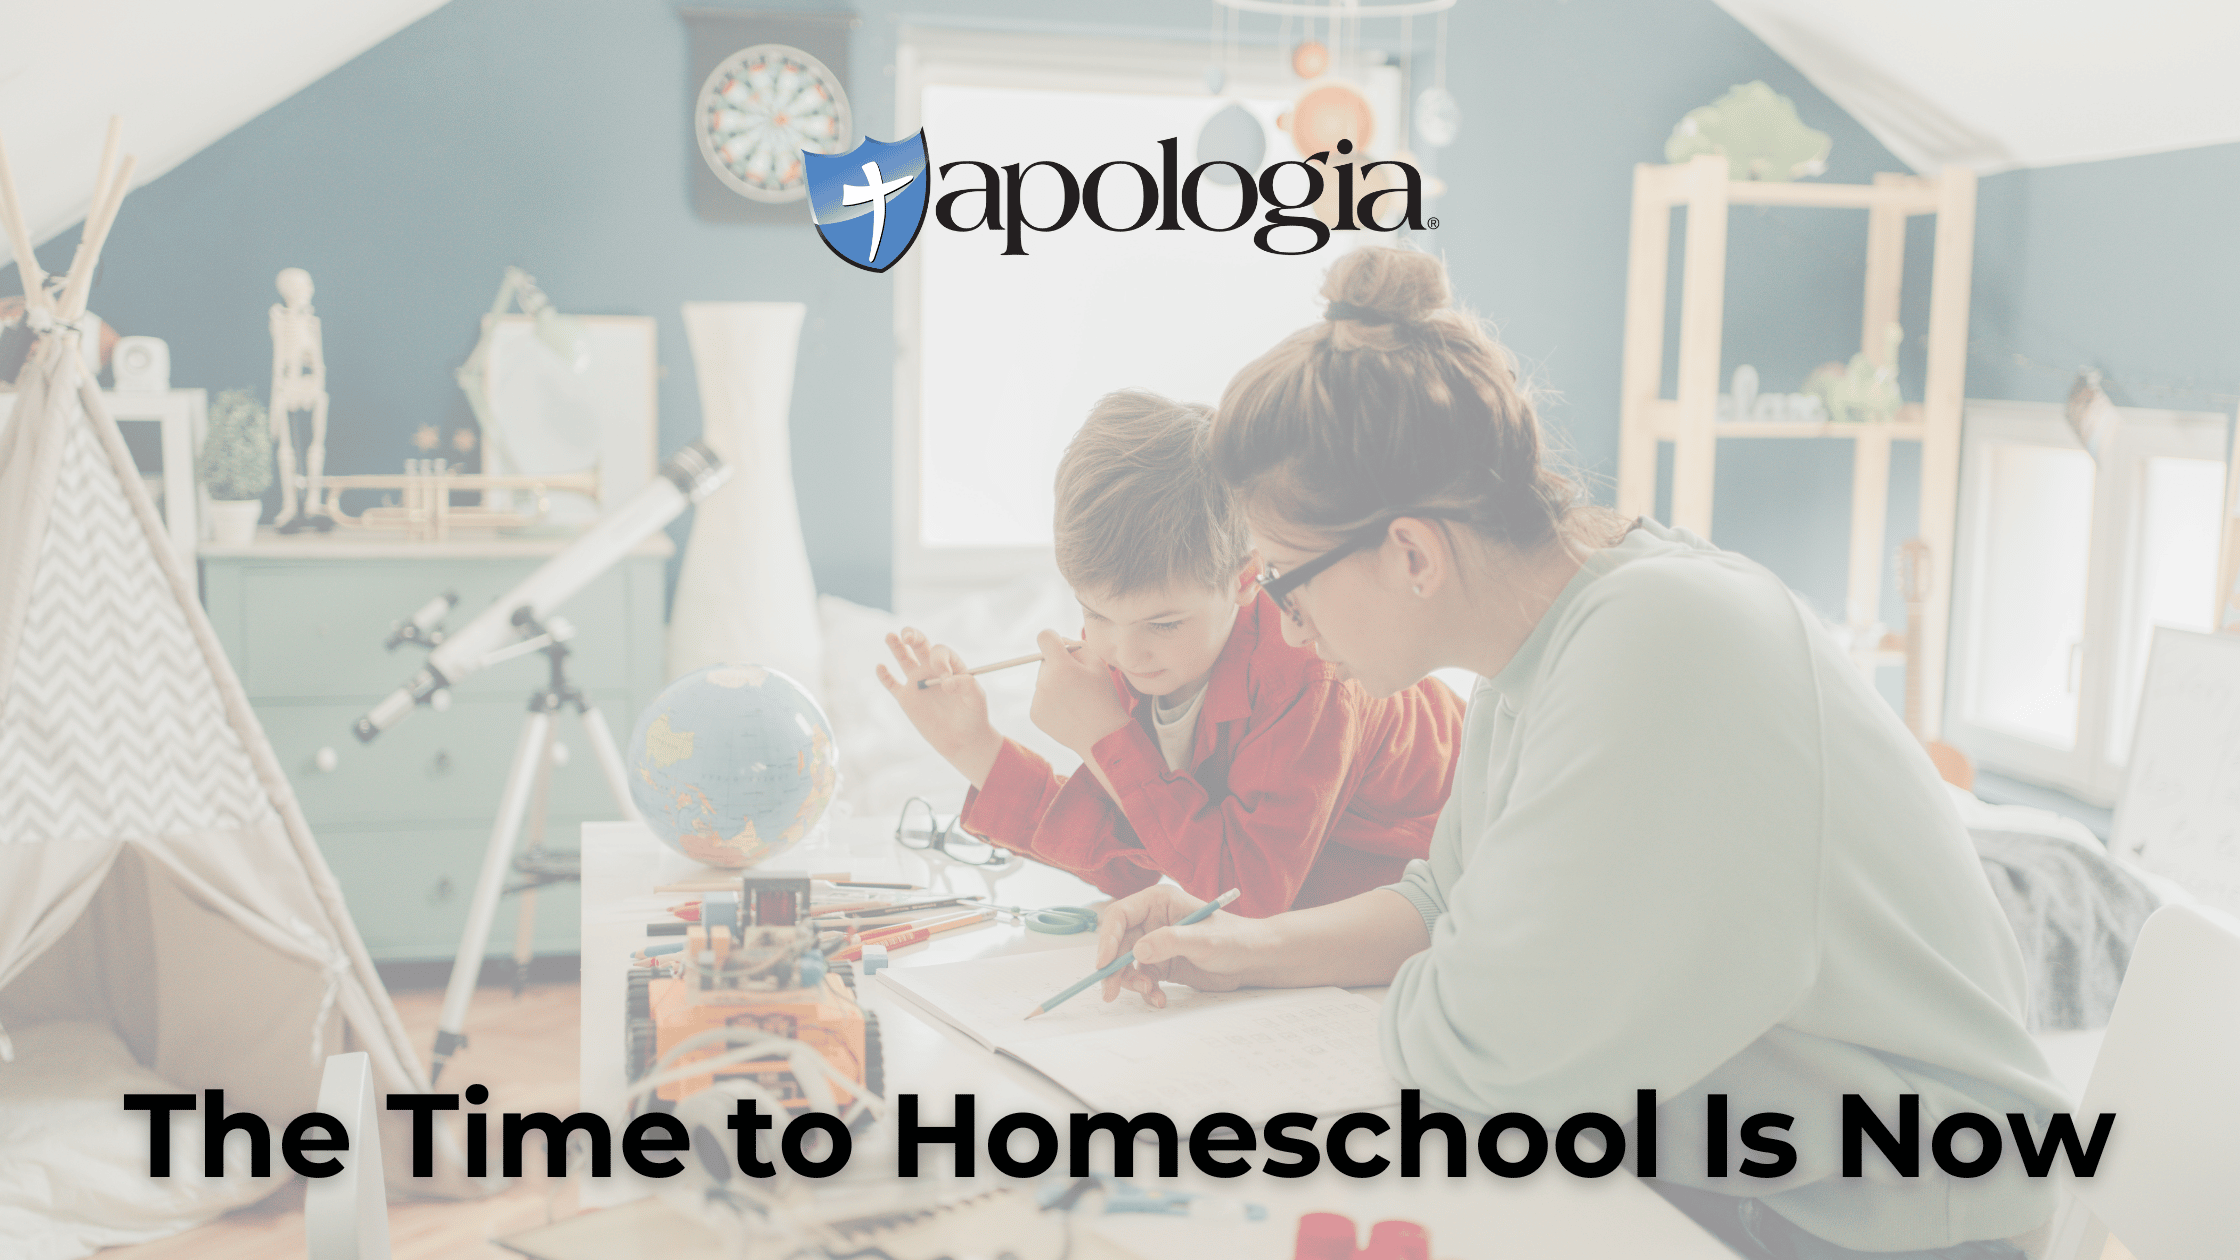 The Time to Homeschool Is Now